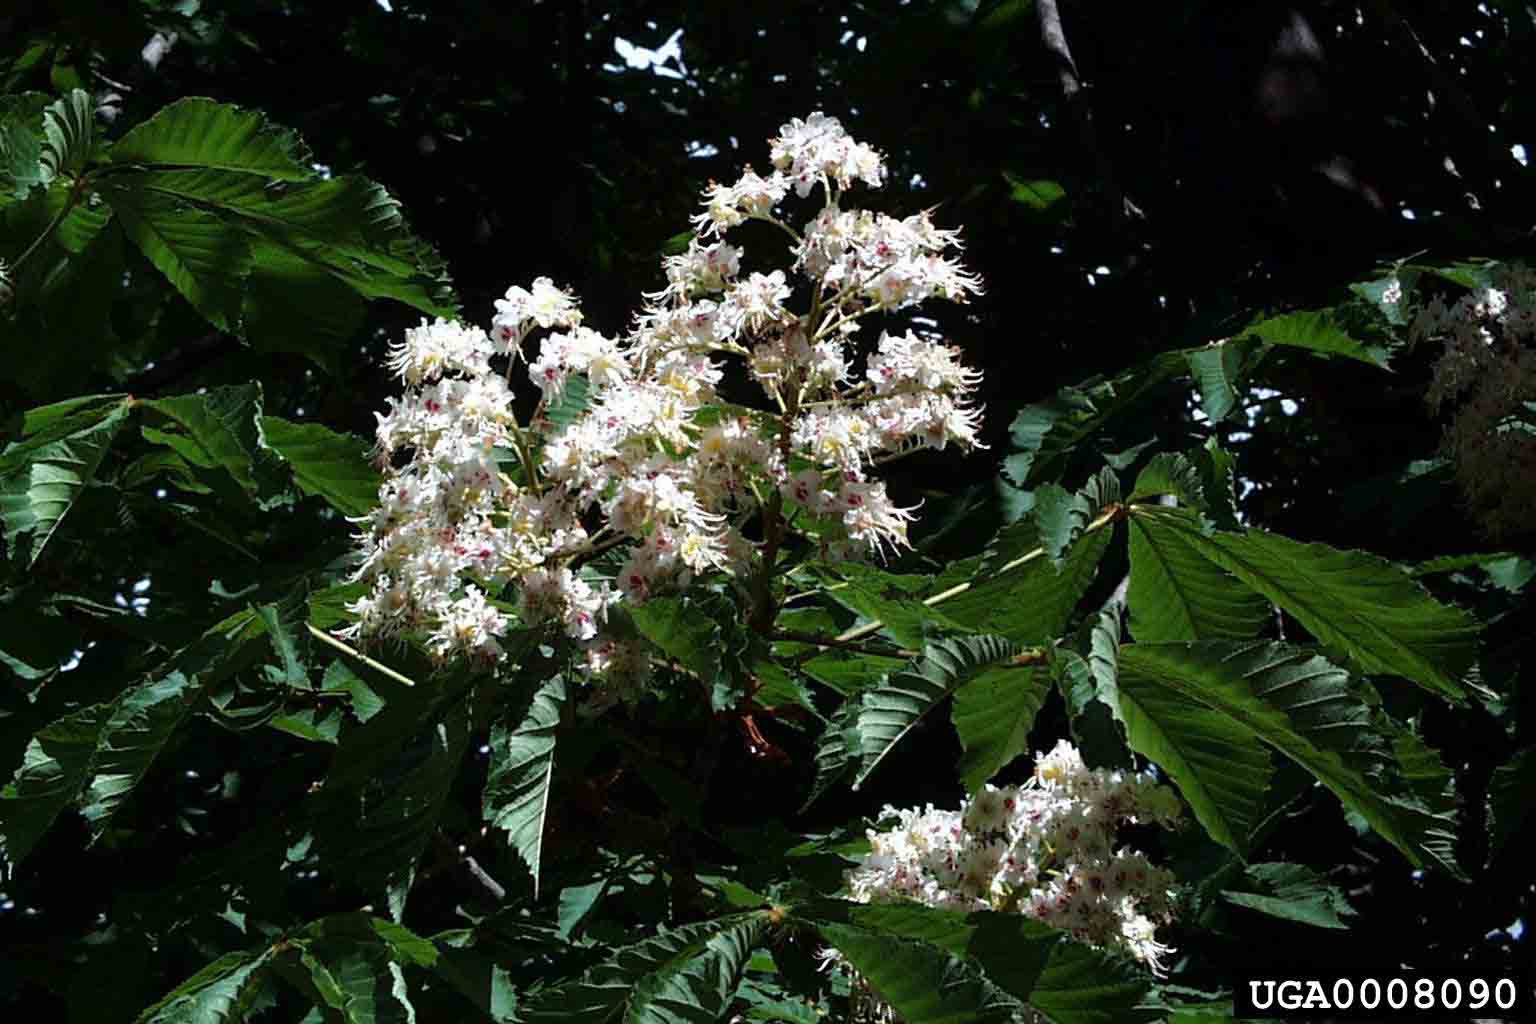 Common horsechestnut flowers in panicles